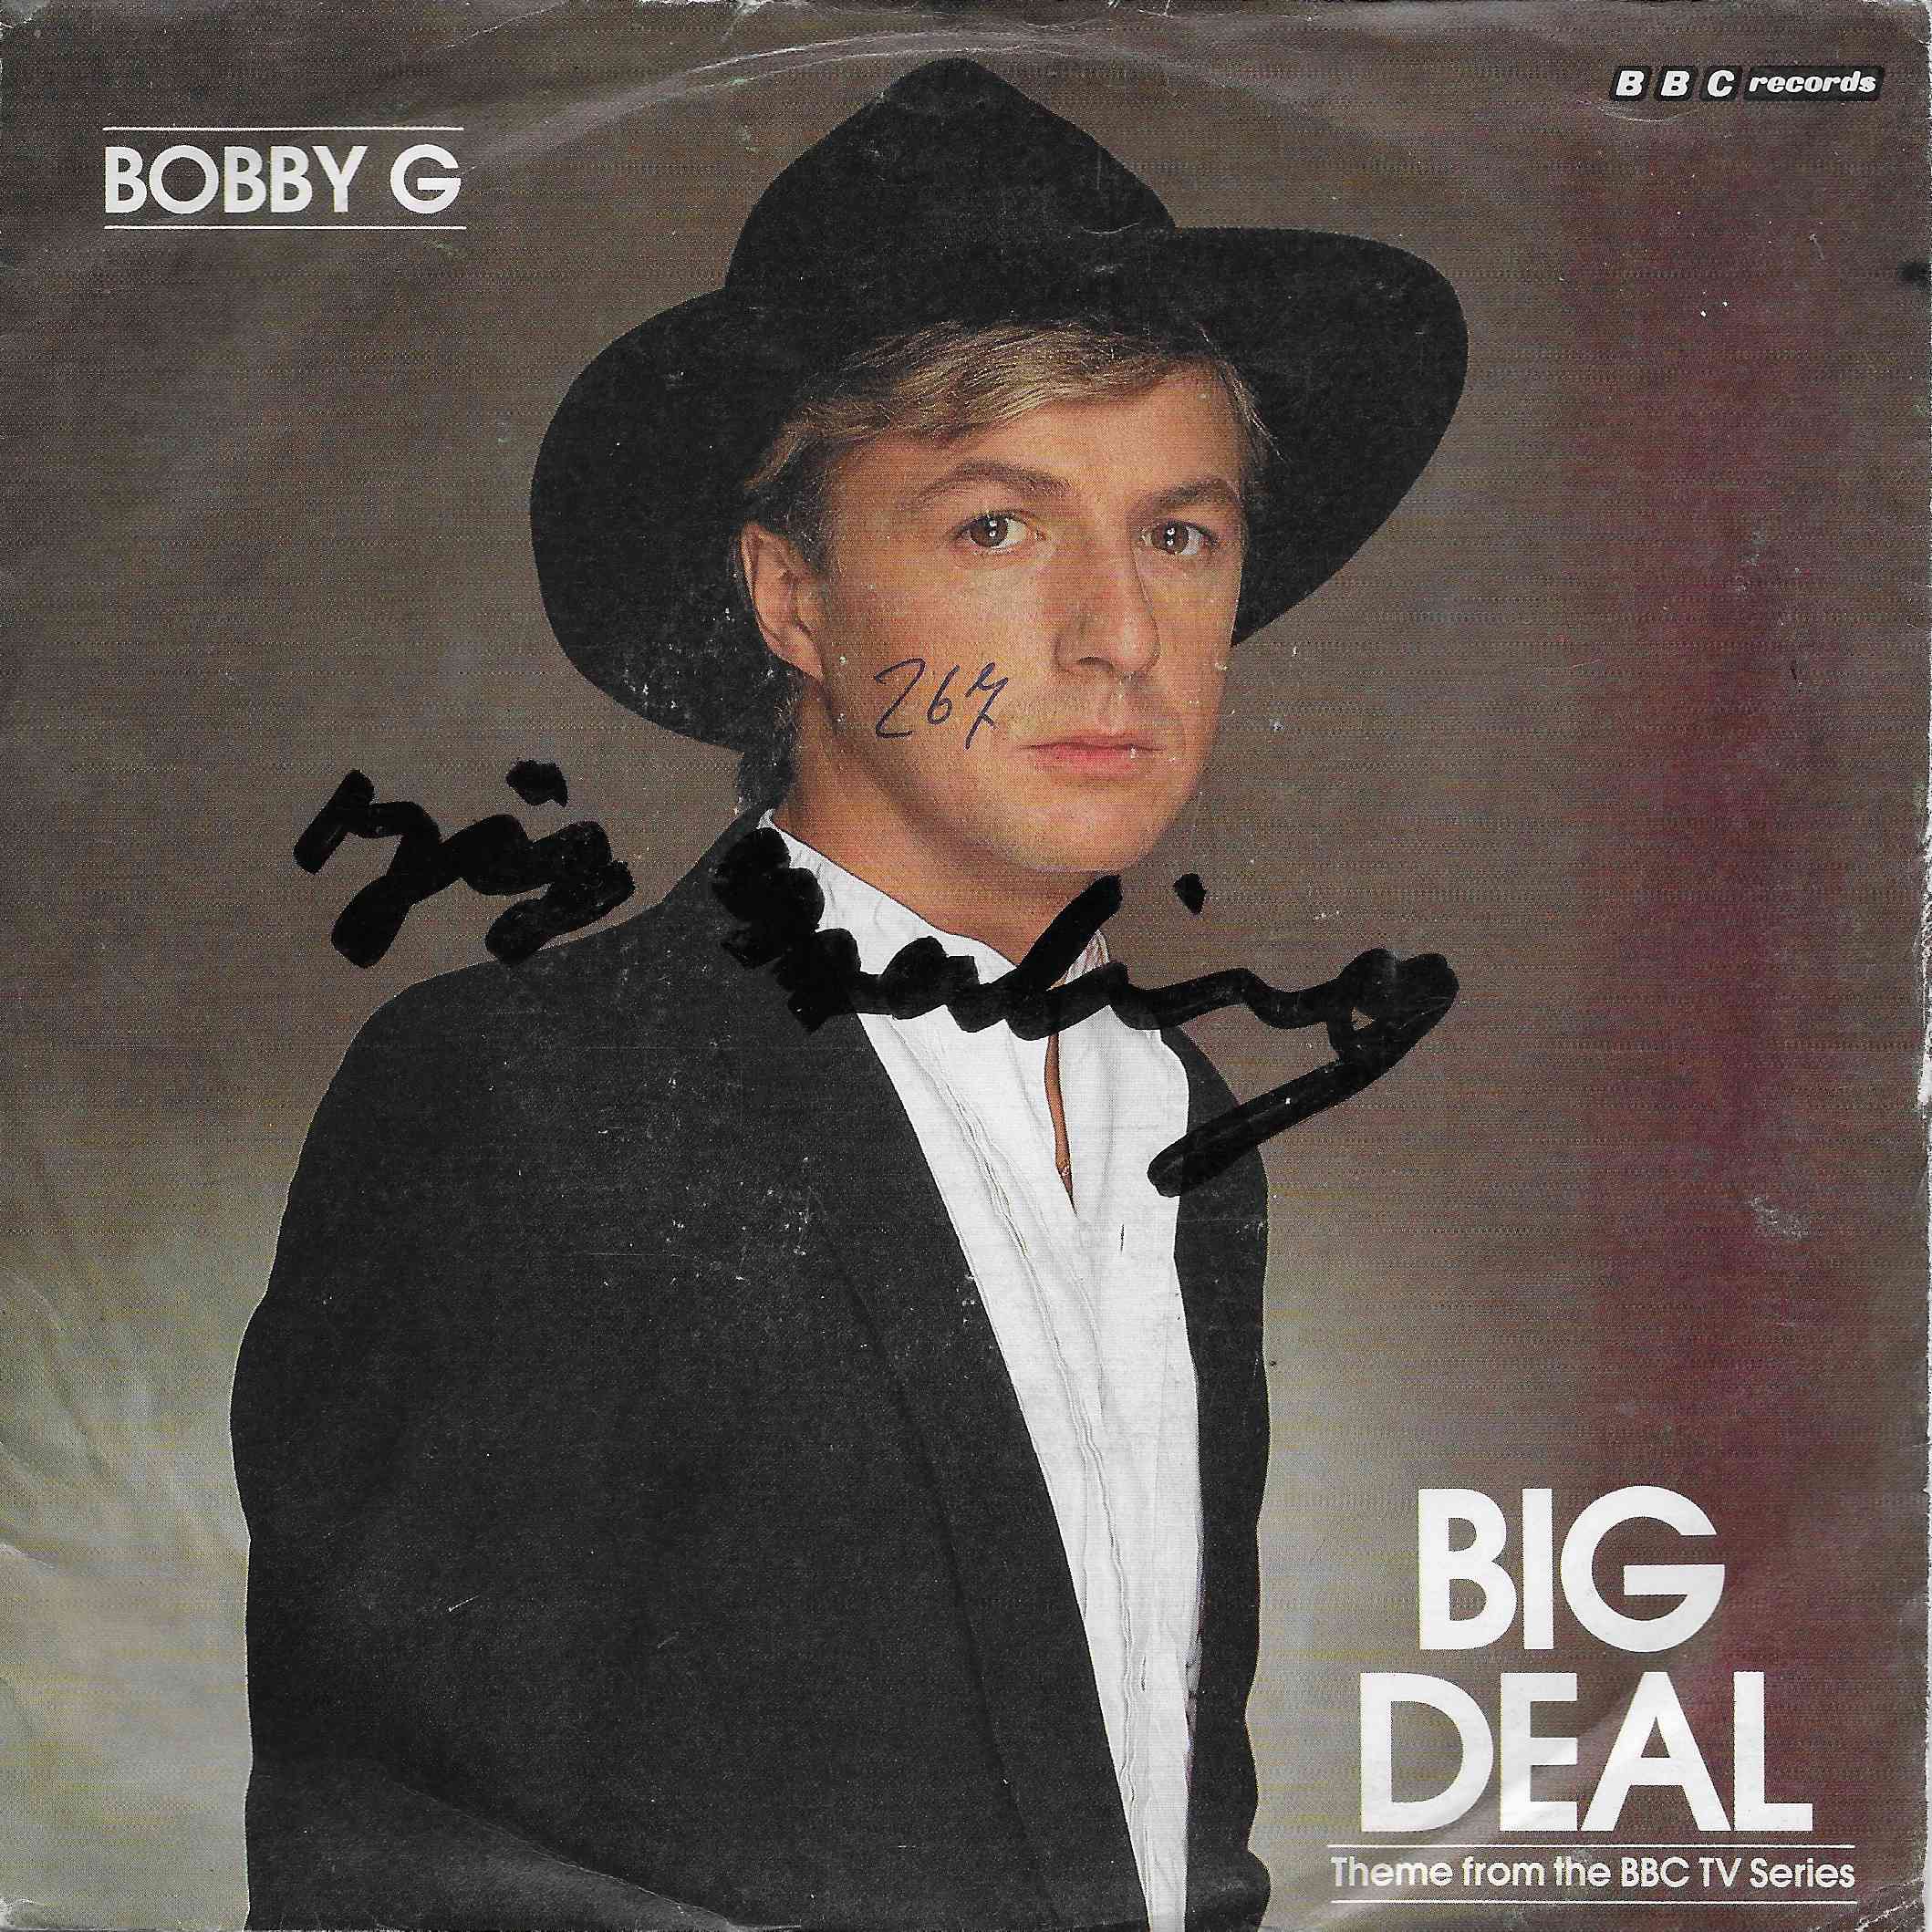 Picture of INT 113.009 Big Deal (German import) by artist Bobby G from the BBC singles - Records and Tapes library